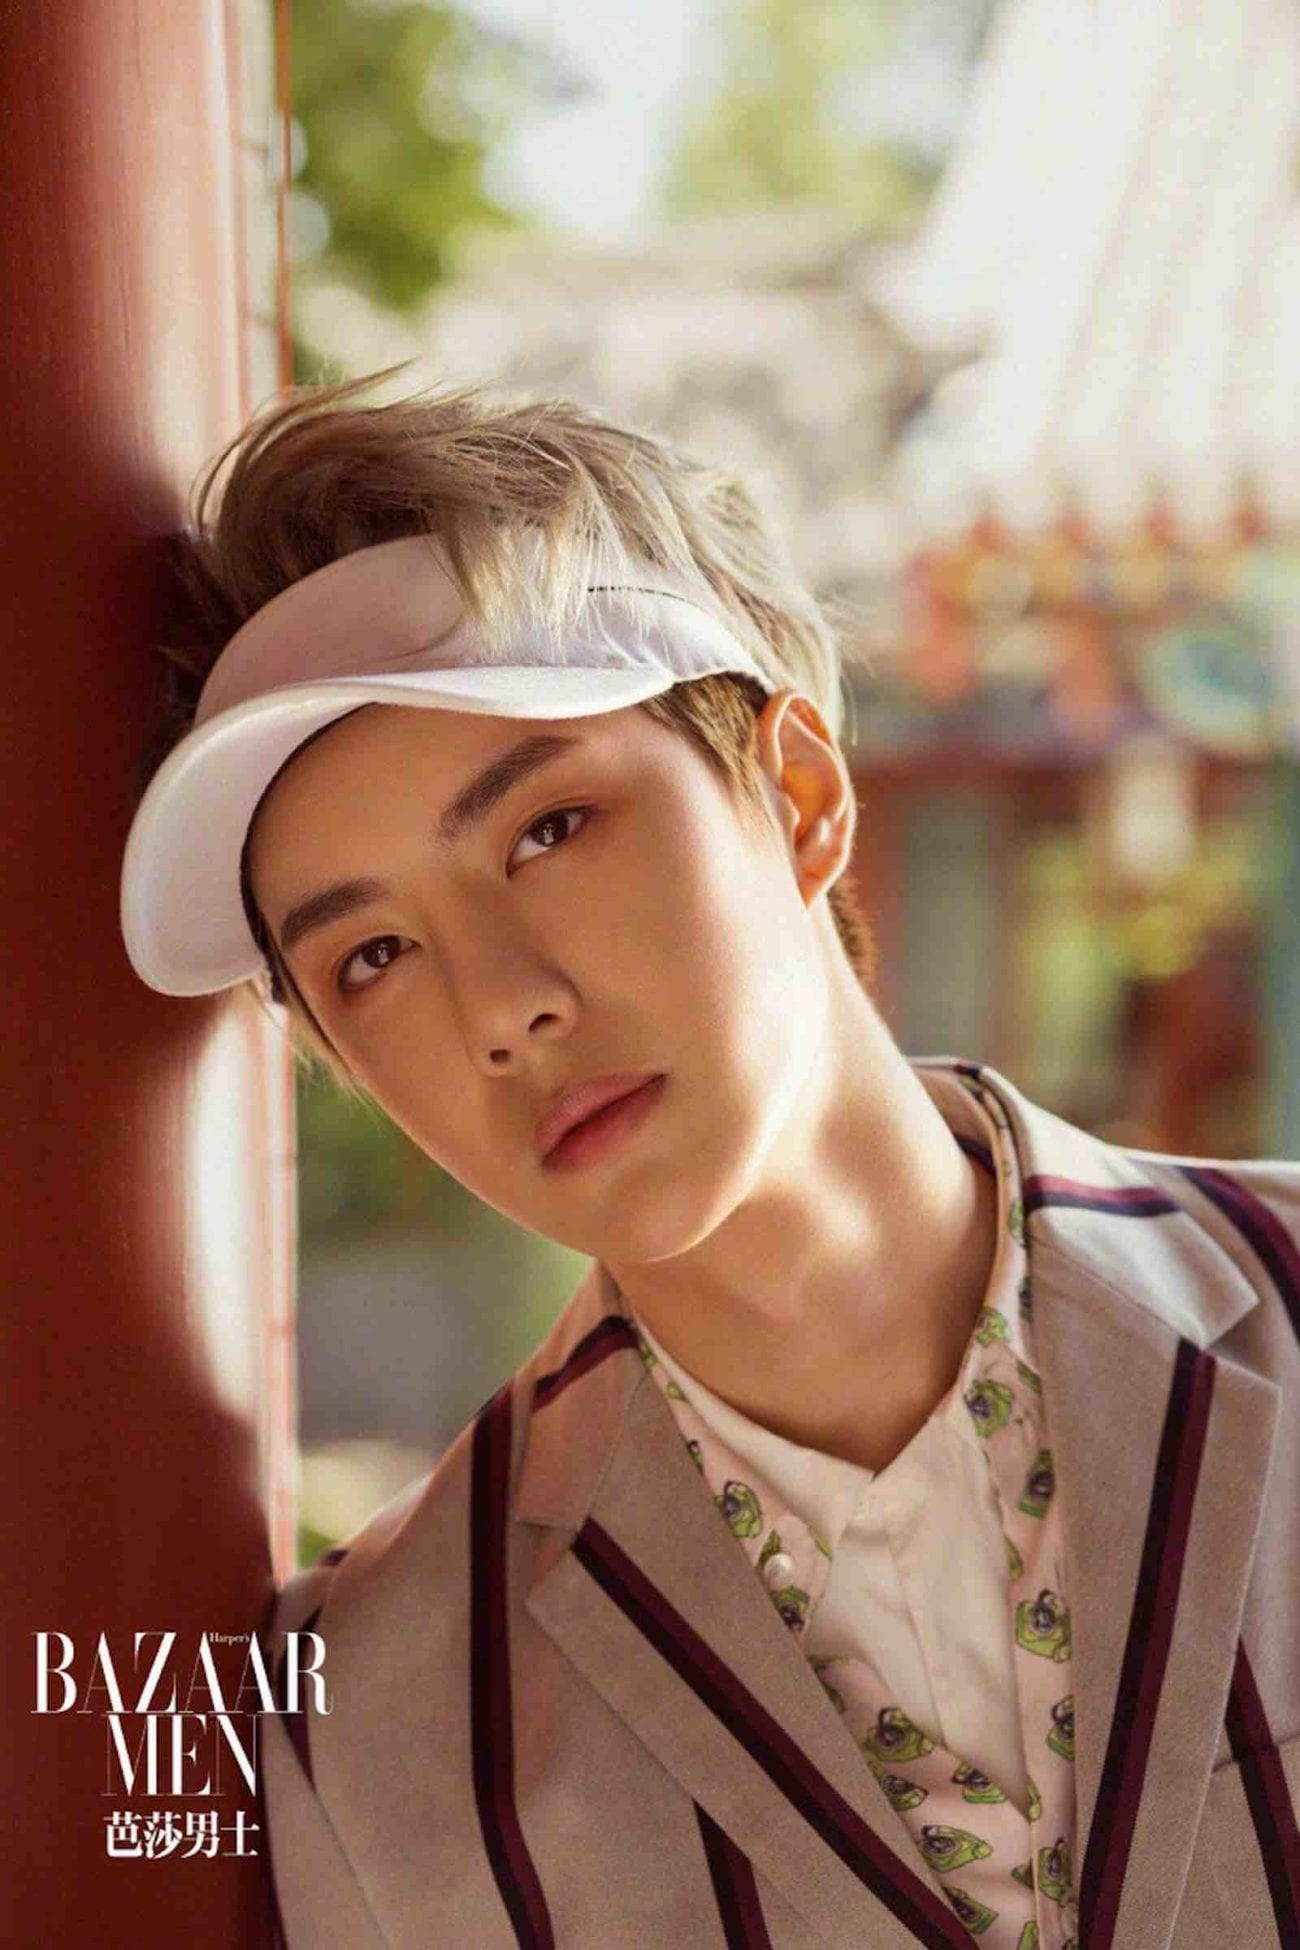 Lucky for you, if you just want to bask in Wang Yibo’s gorgeousness, we have 5 favorite Wang Yibo photoshoots that we’d love to share with you.